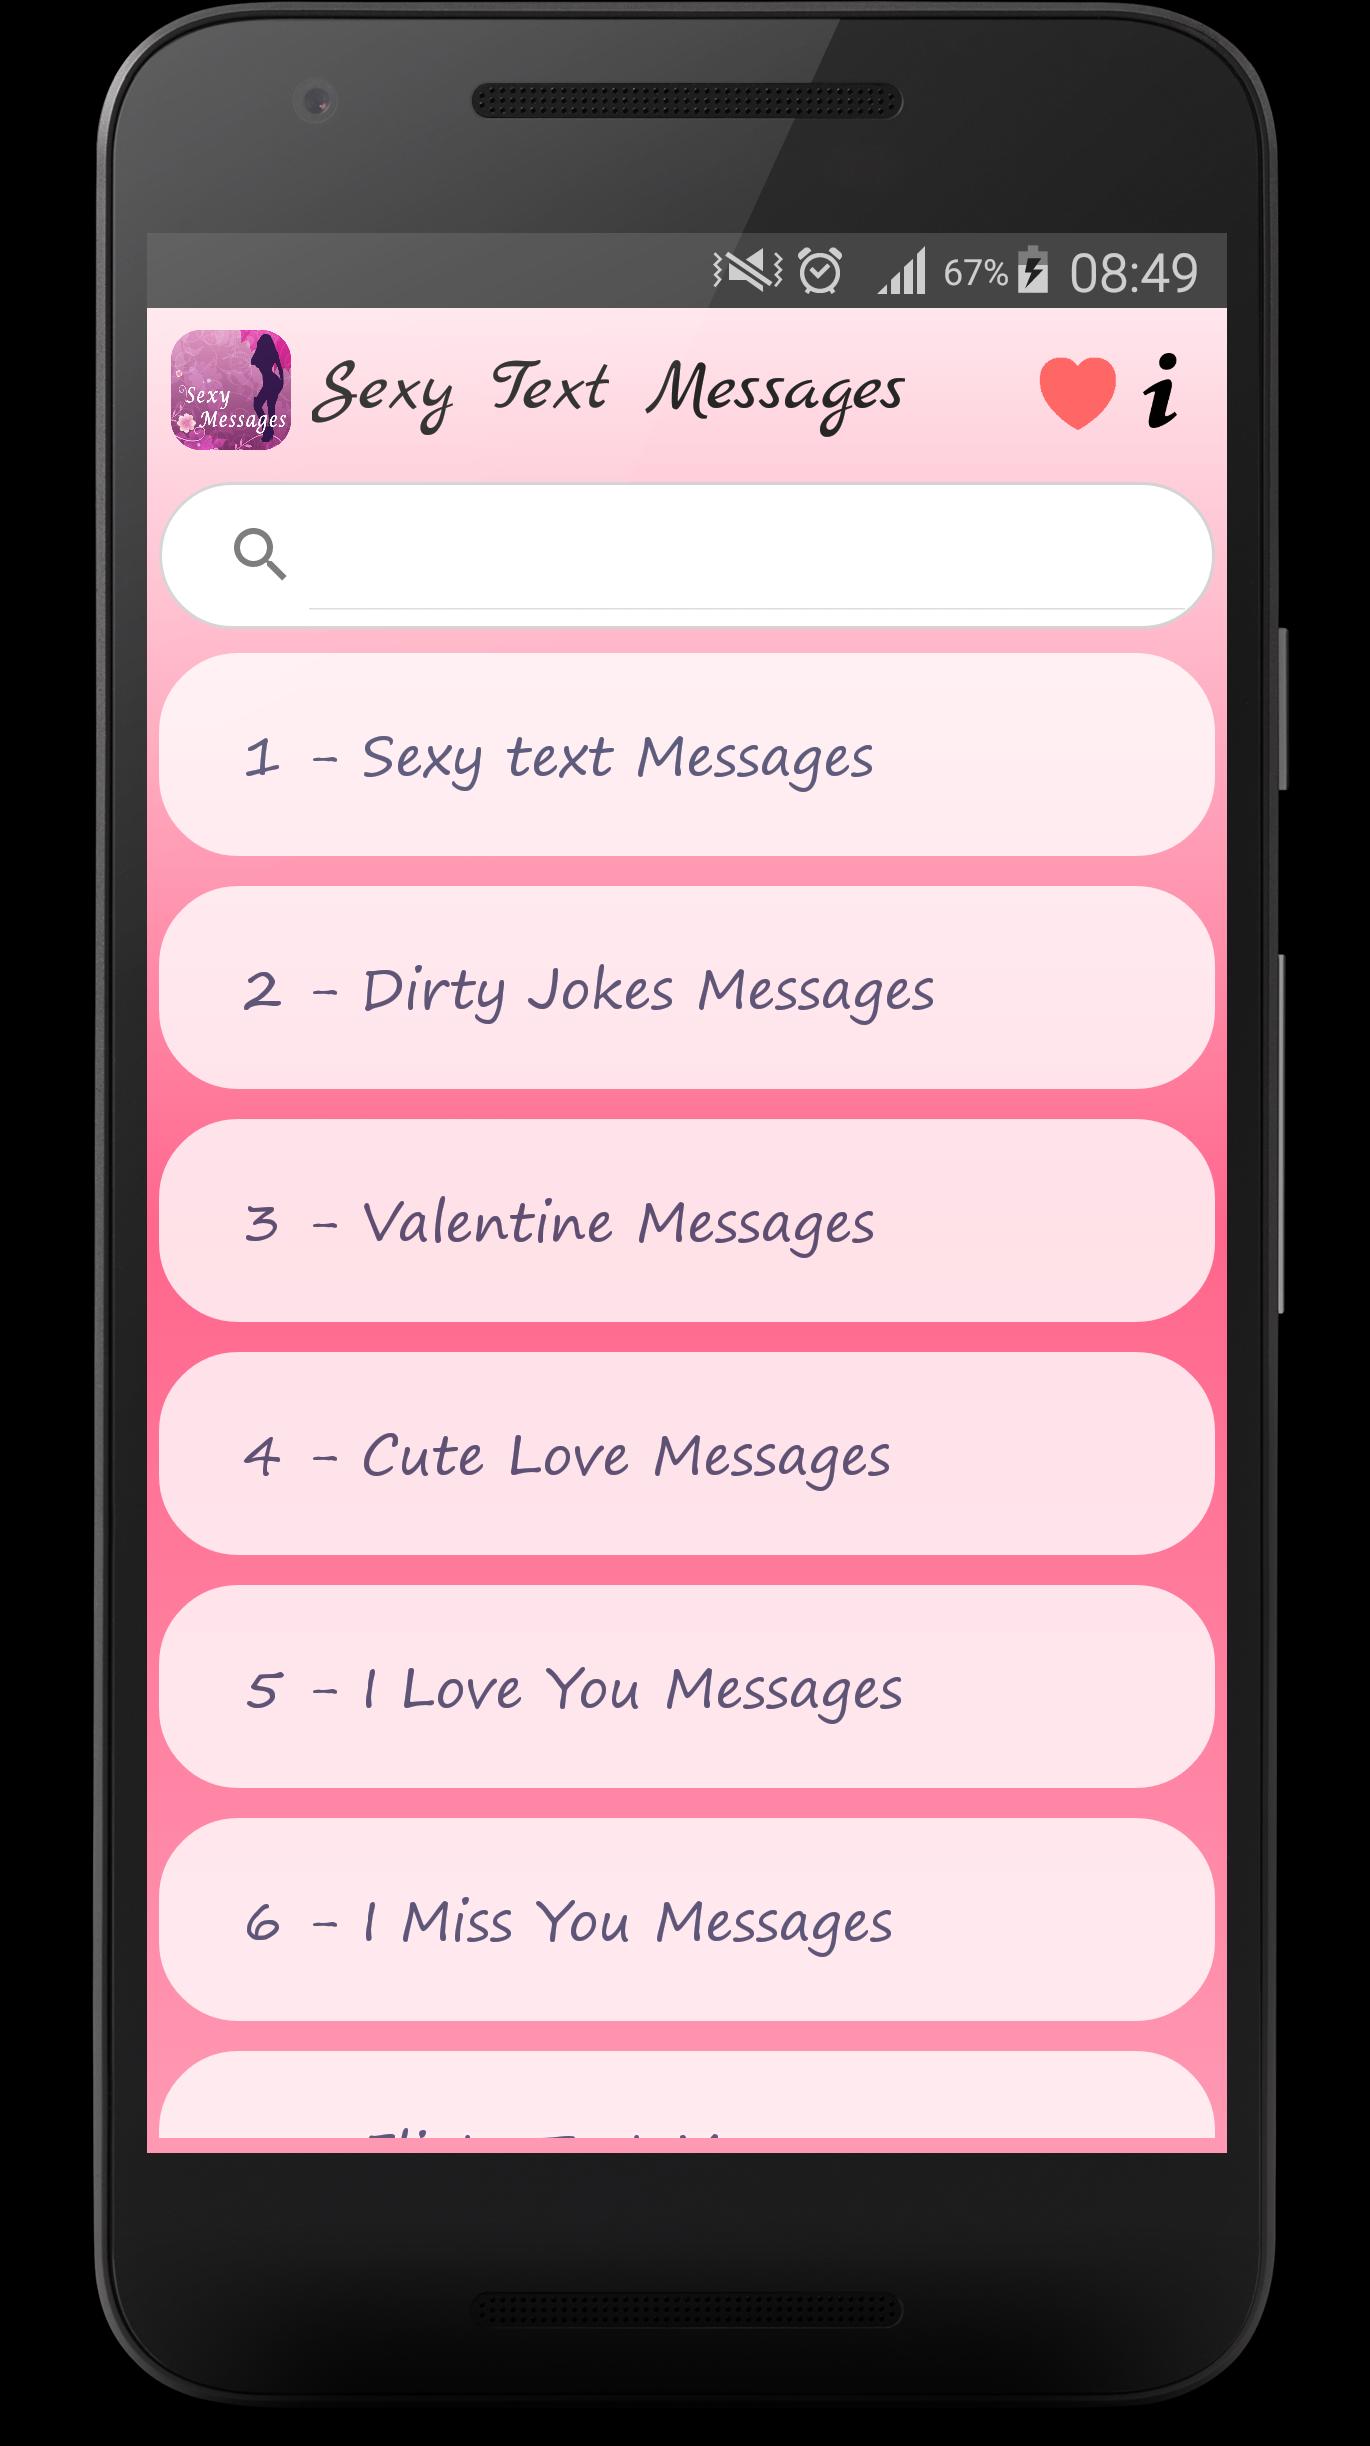 The Best Sexy Text Messages постер.